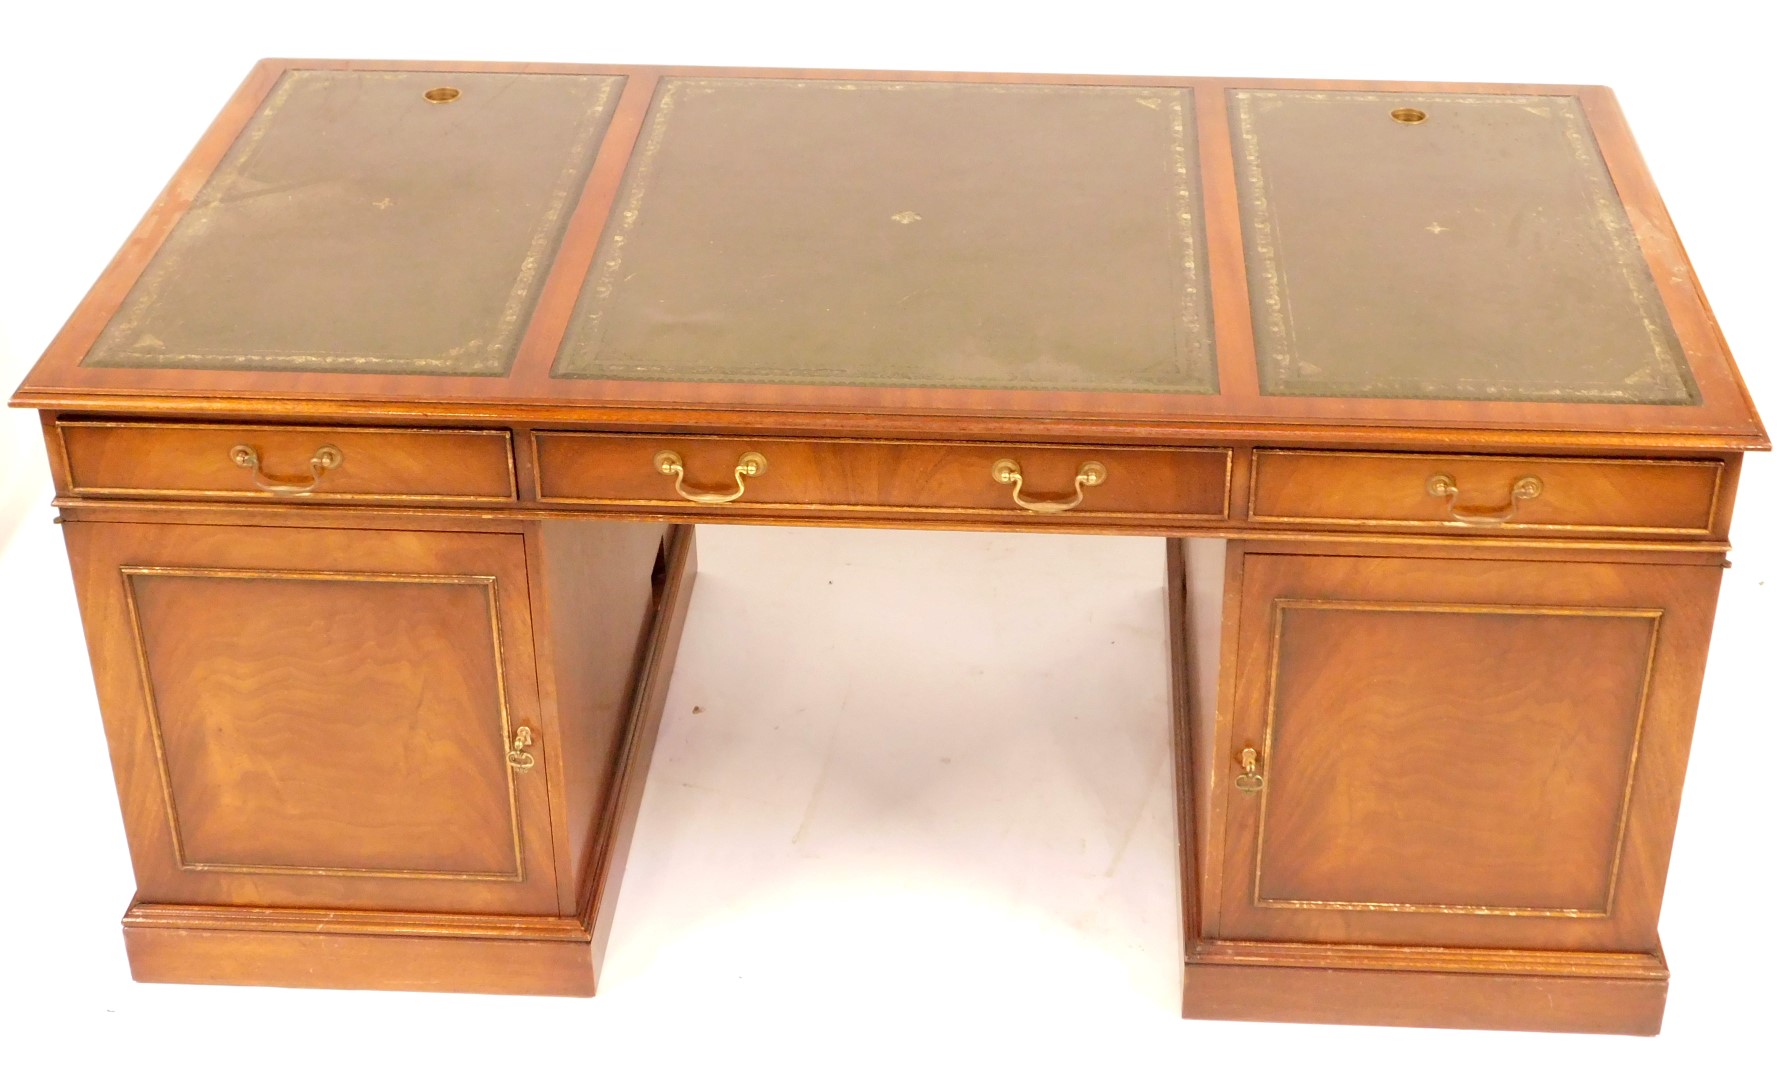 A reproduction Georgian style mahogany kneehole desk, with triple panelled green leather inset top a - Image 2 of 2